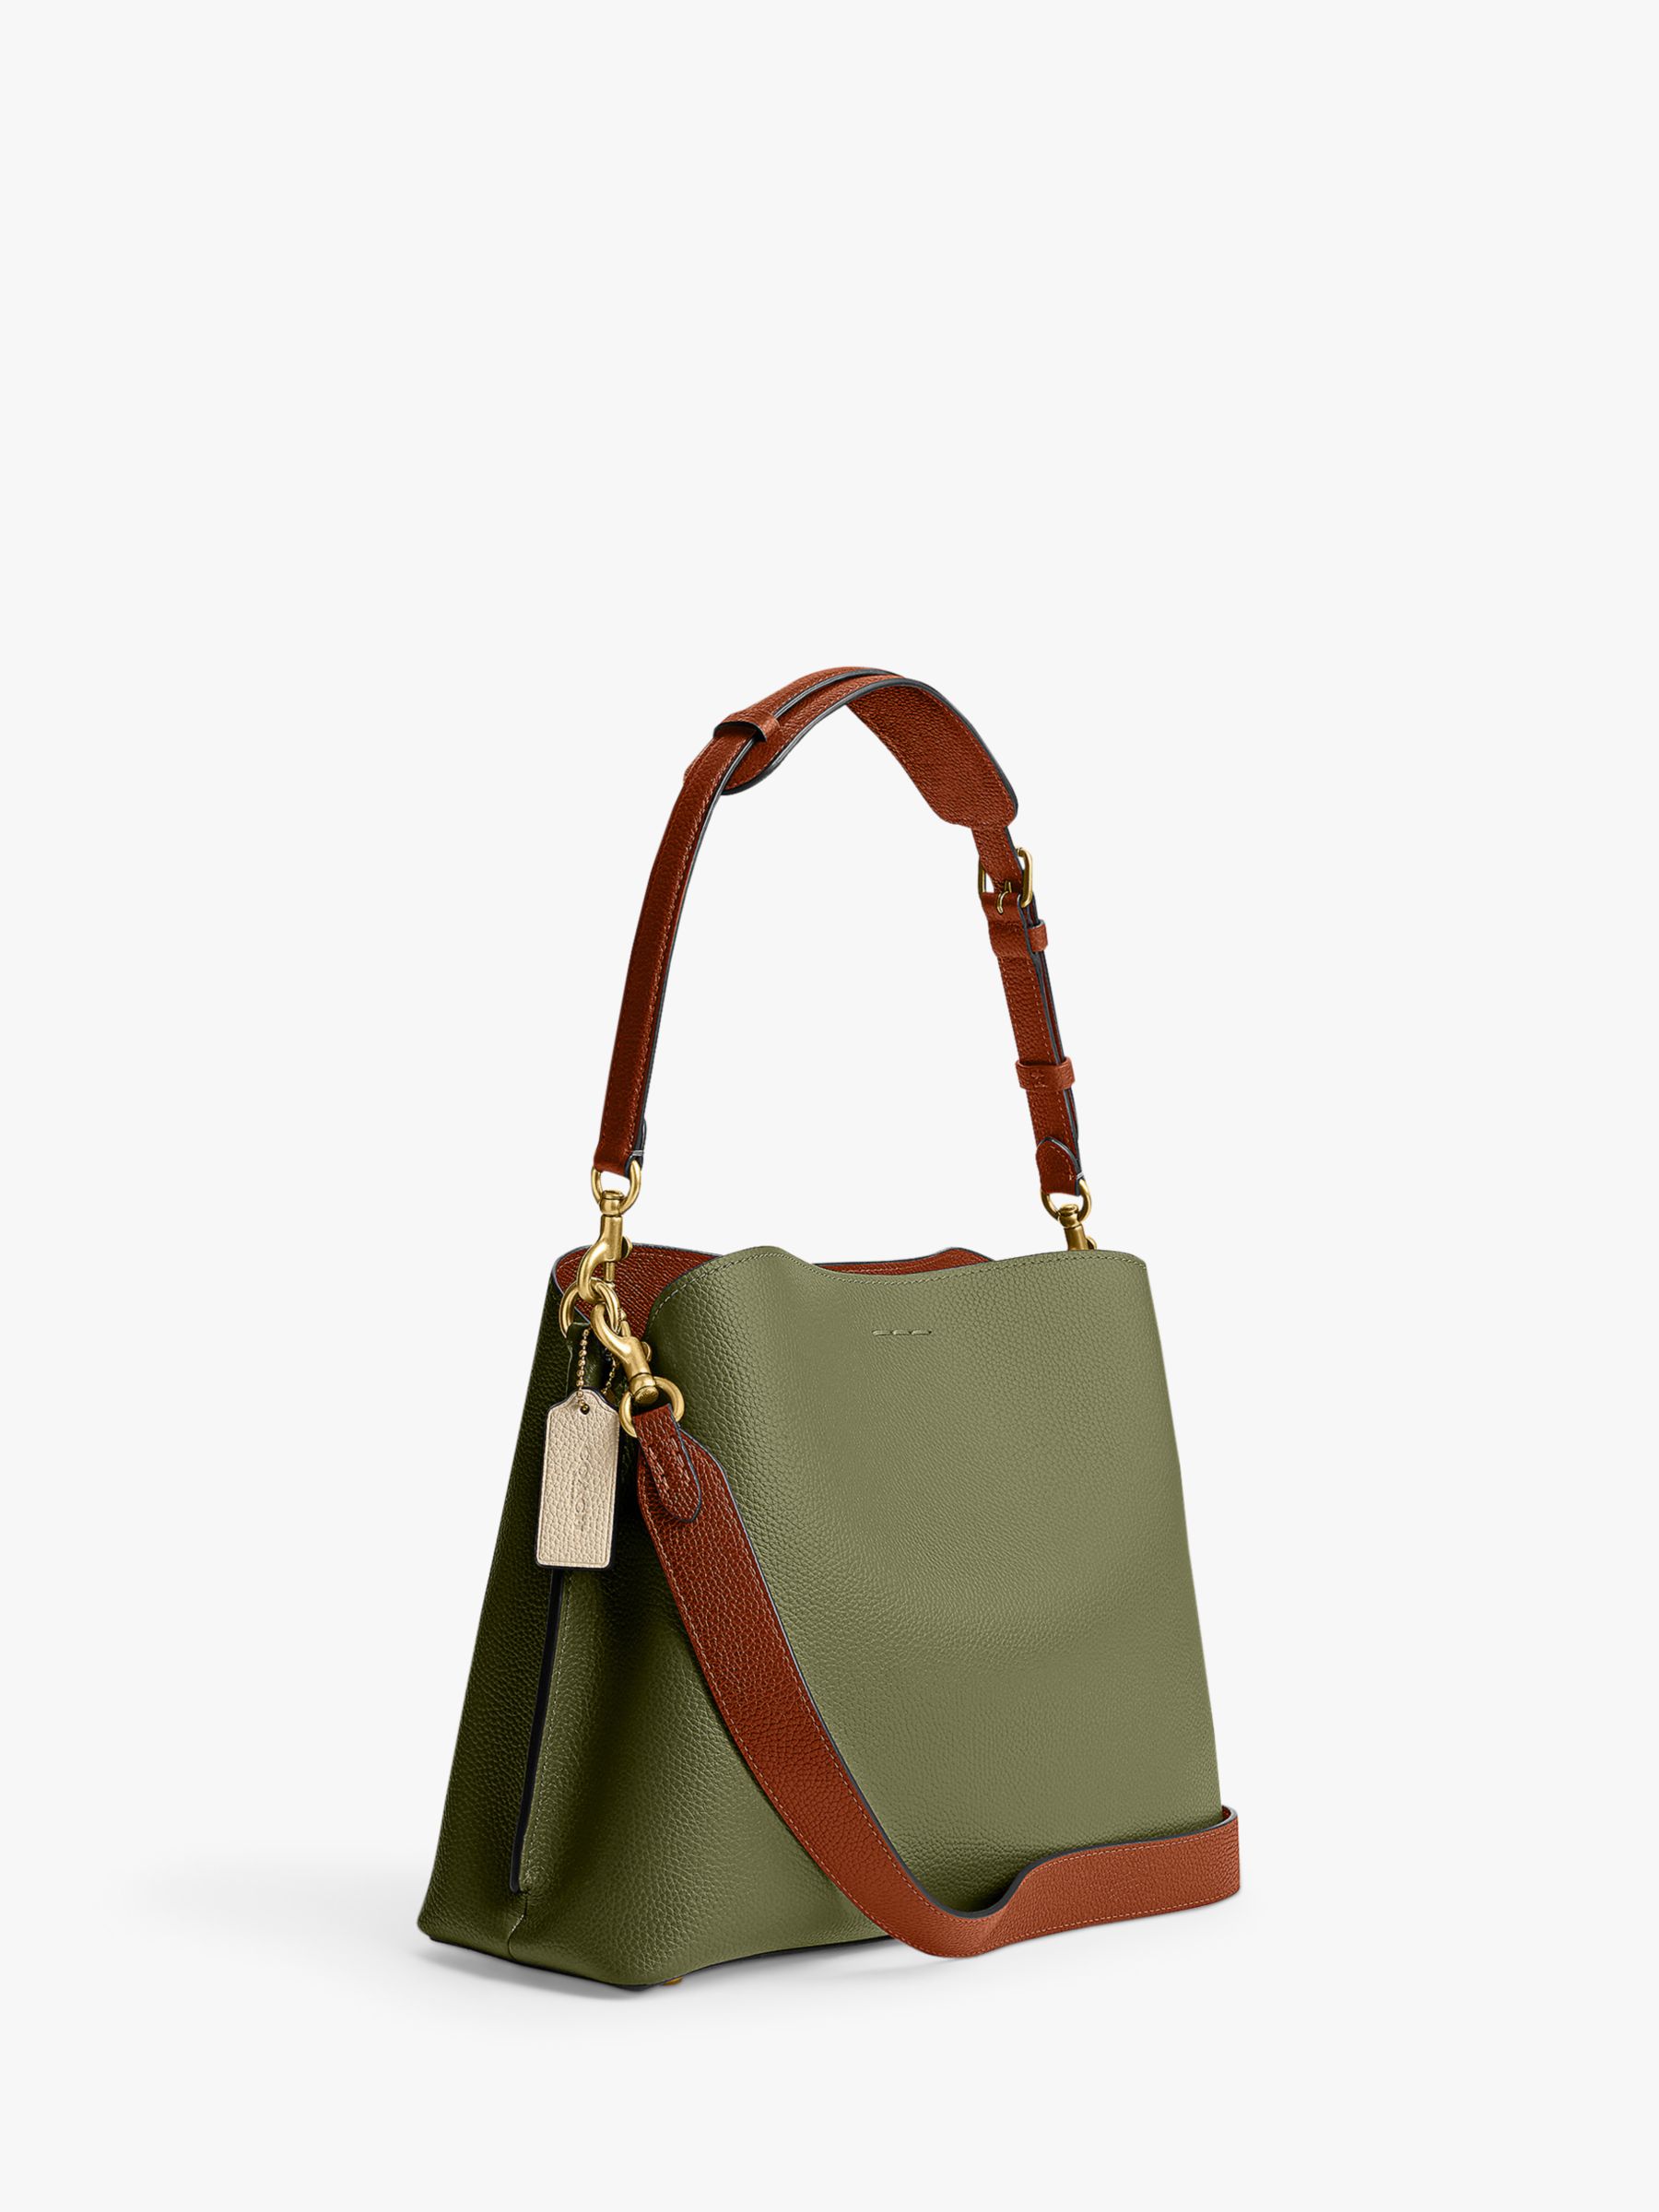 Coach Willow Leather Shoulder Bag, Moss at John Lewis & Partners